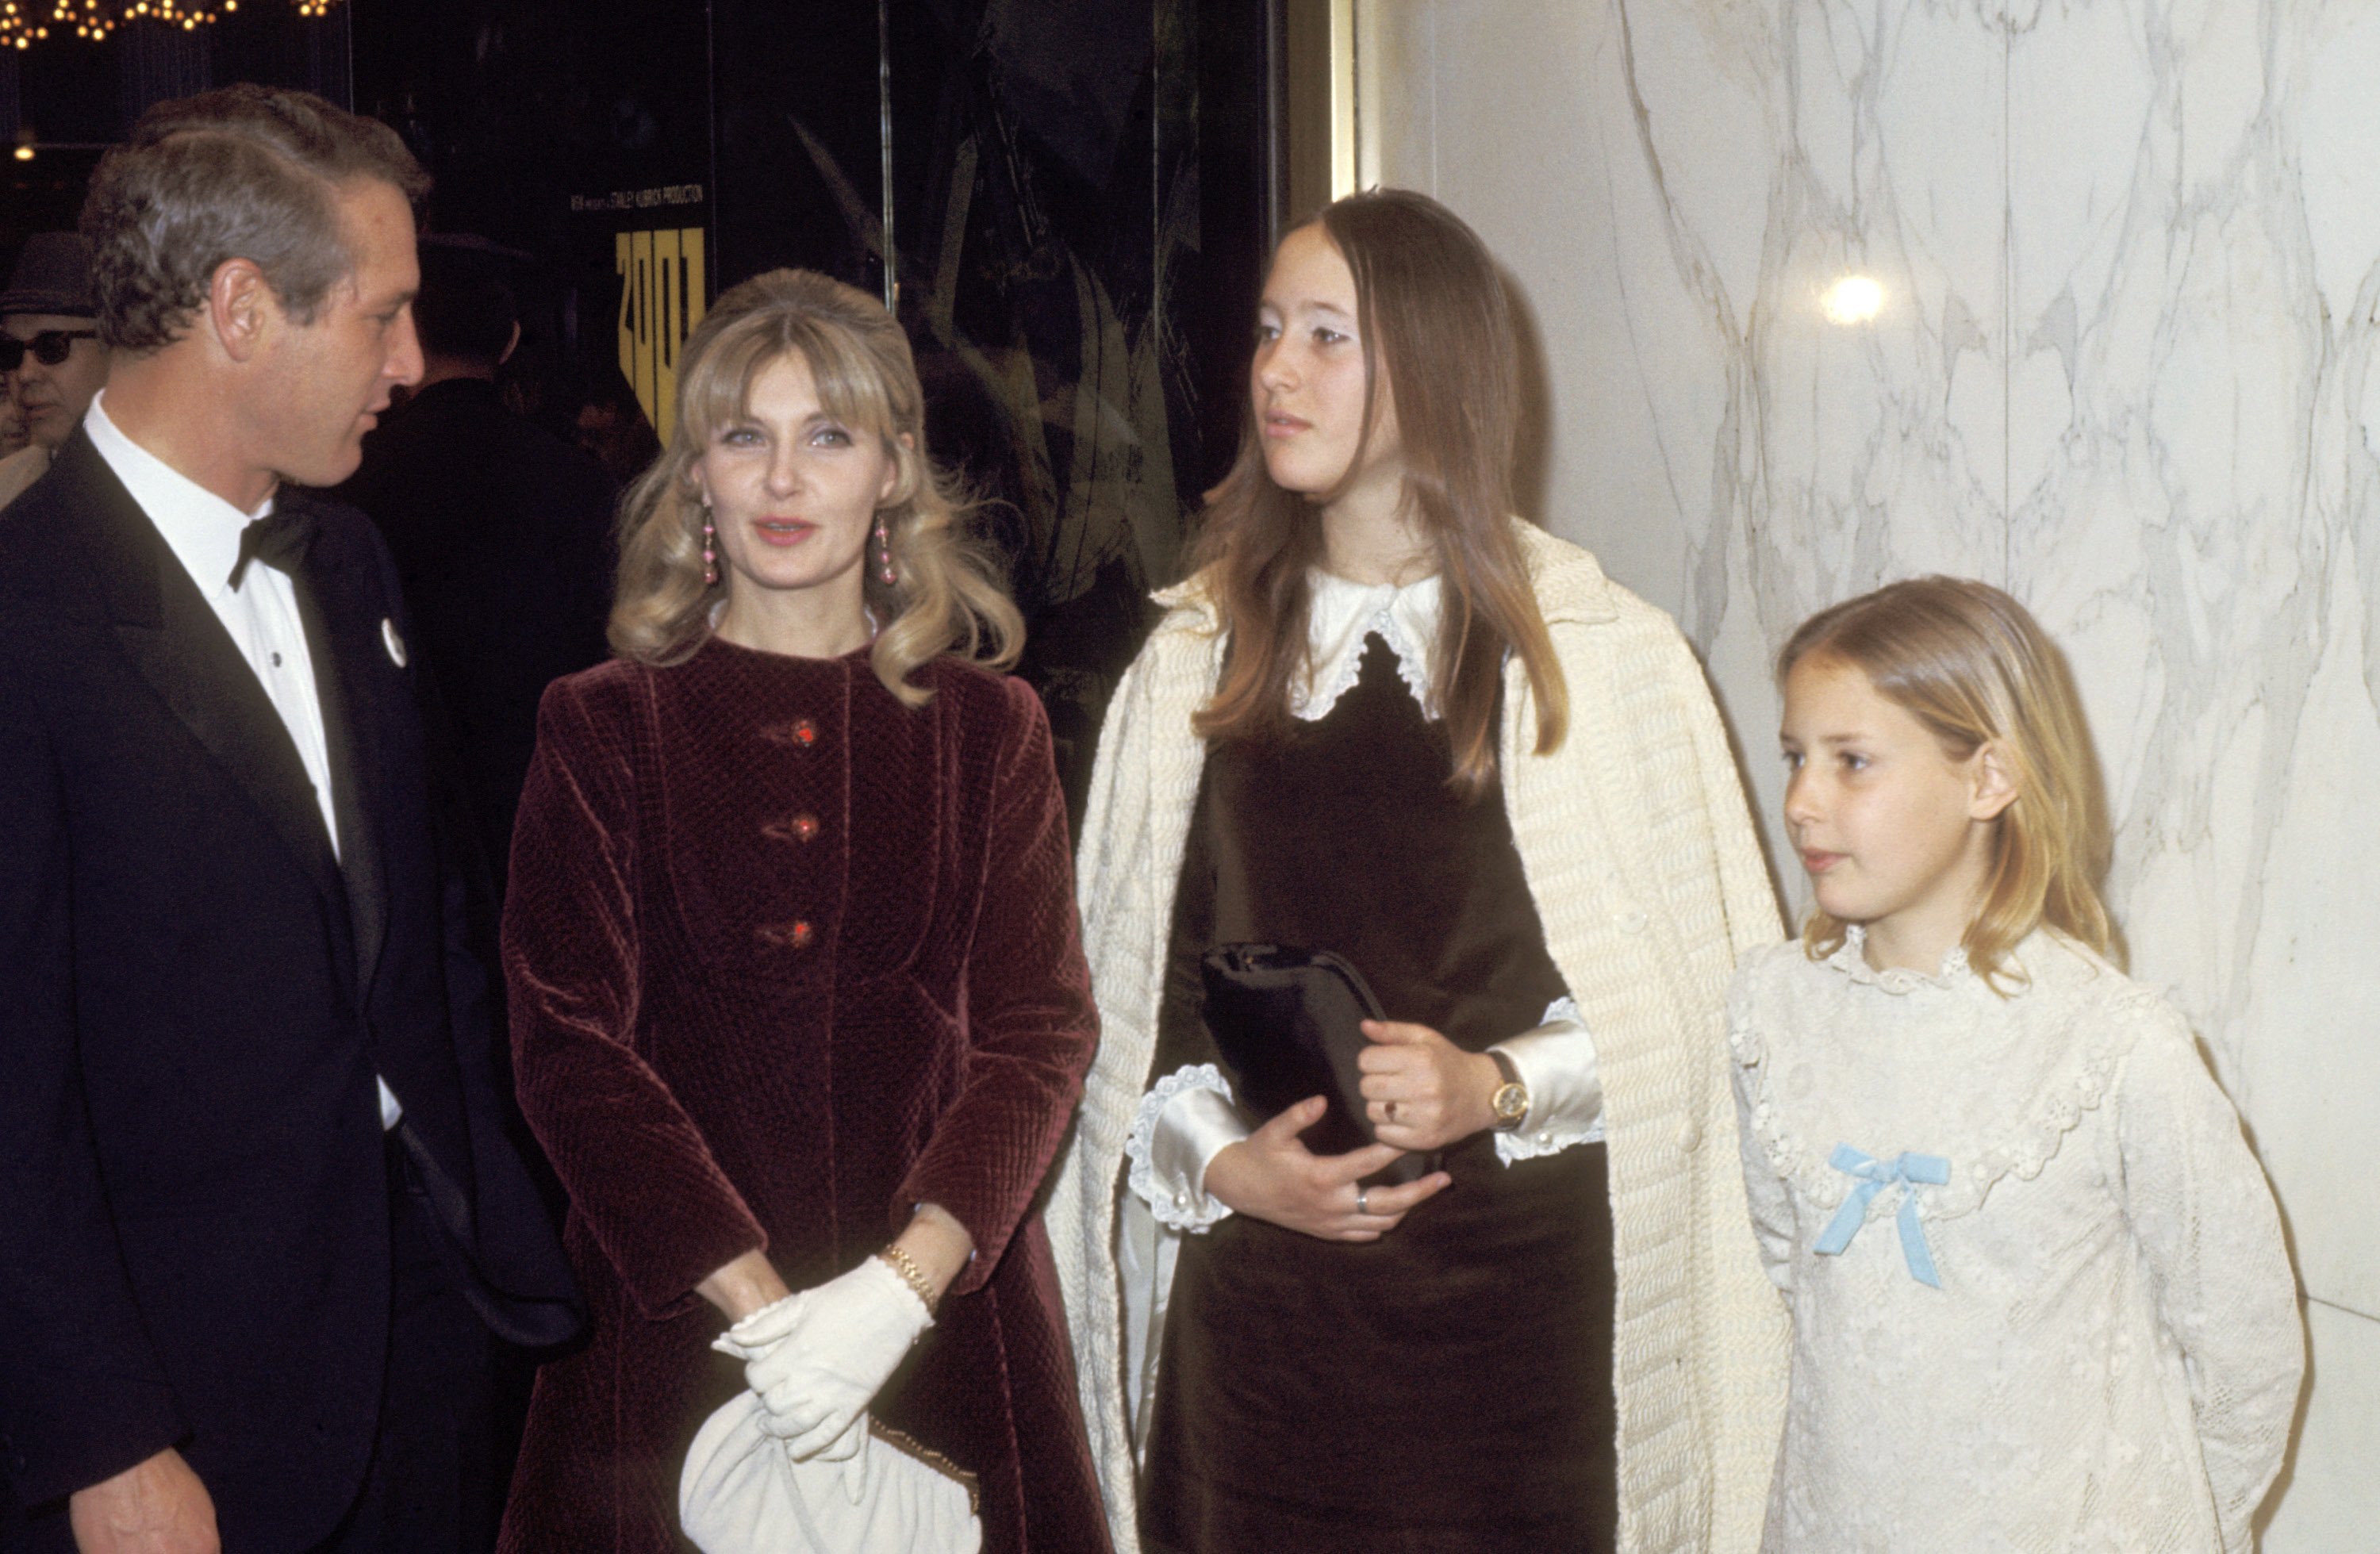 Paul Newman and wife actress Joanne Woodward with their daughters at the "2001: A Space Odyssey" screening on April 3, 1968 in New York City. / Source: Getty Images